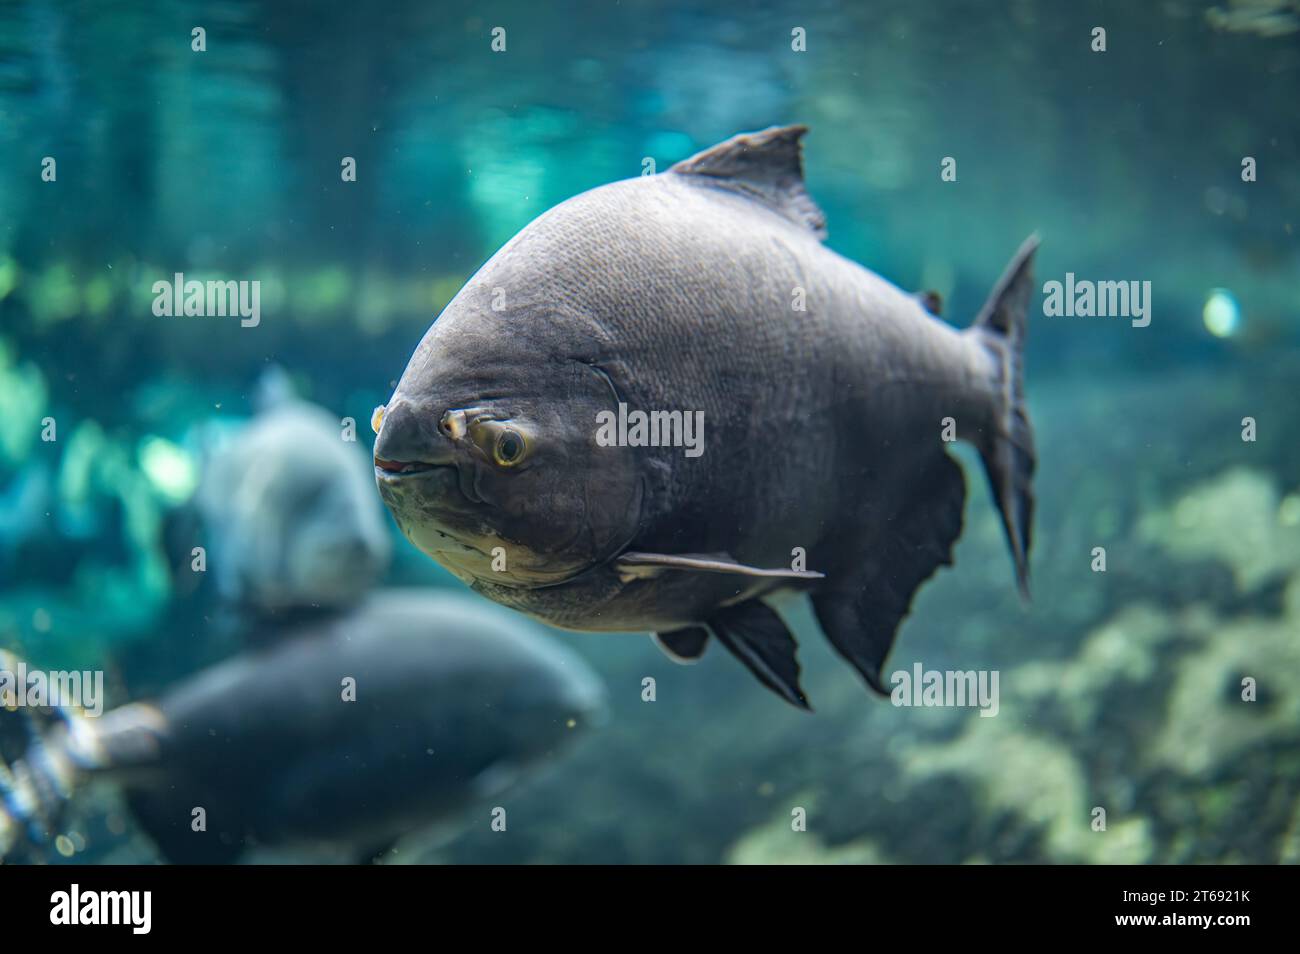 Portrait of a fish swimming in the water Stock Photo